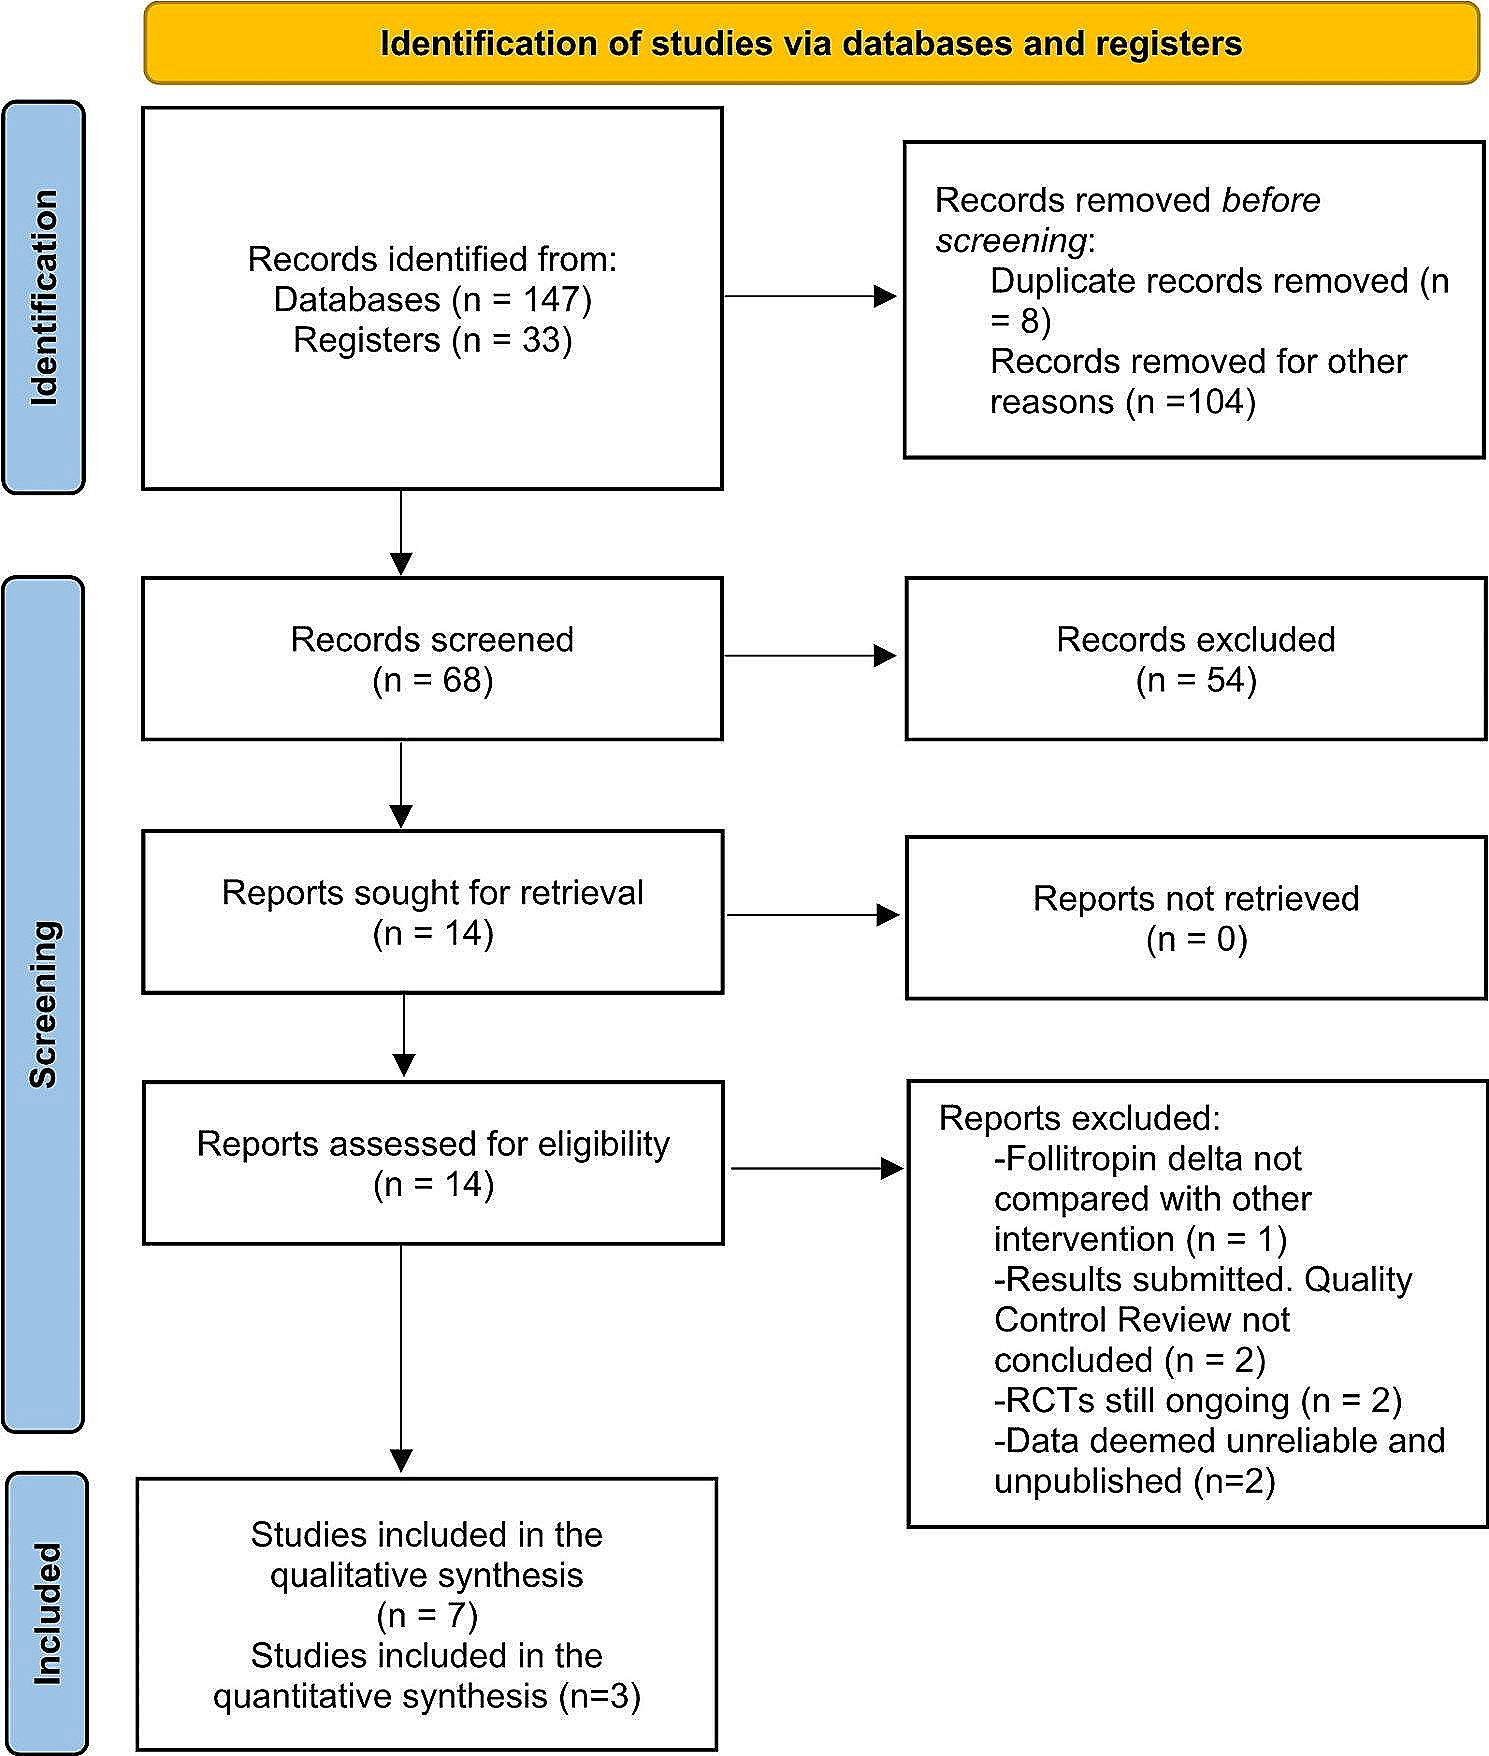 Efficacy and safety of follitropin delta for ovarian stimulation in vitro fertilization/ intracytoplasmic sperm injection cycles: a systematic review with meta-analysis